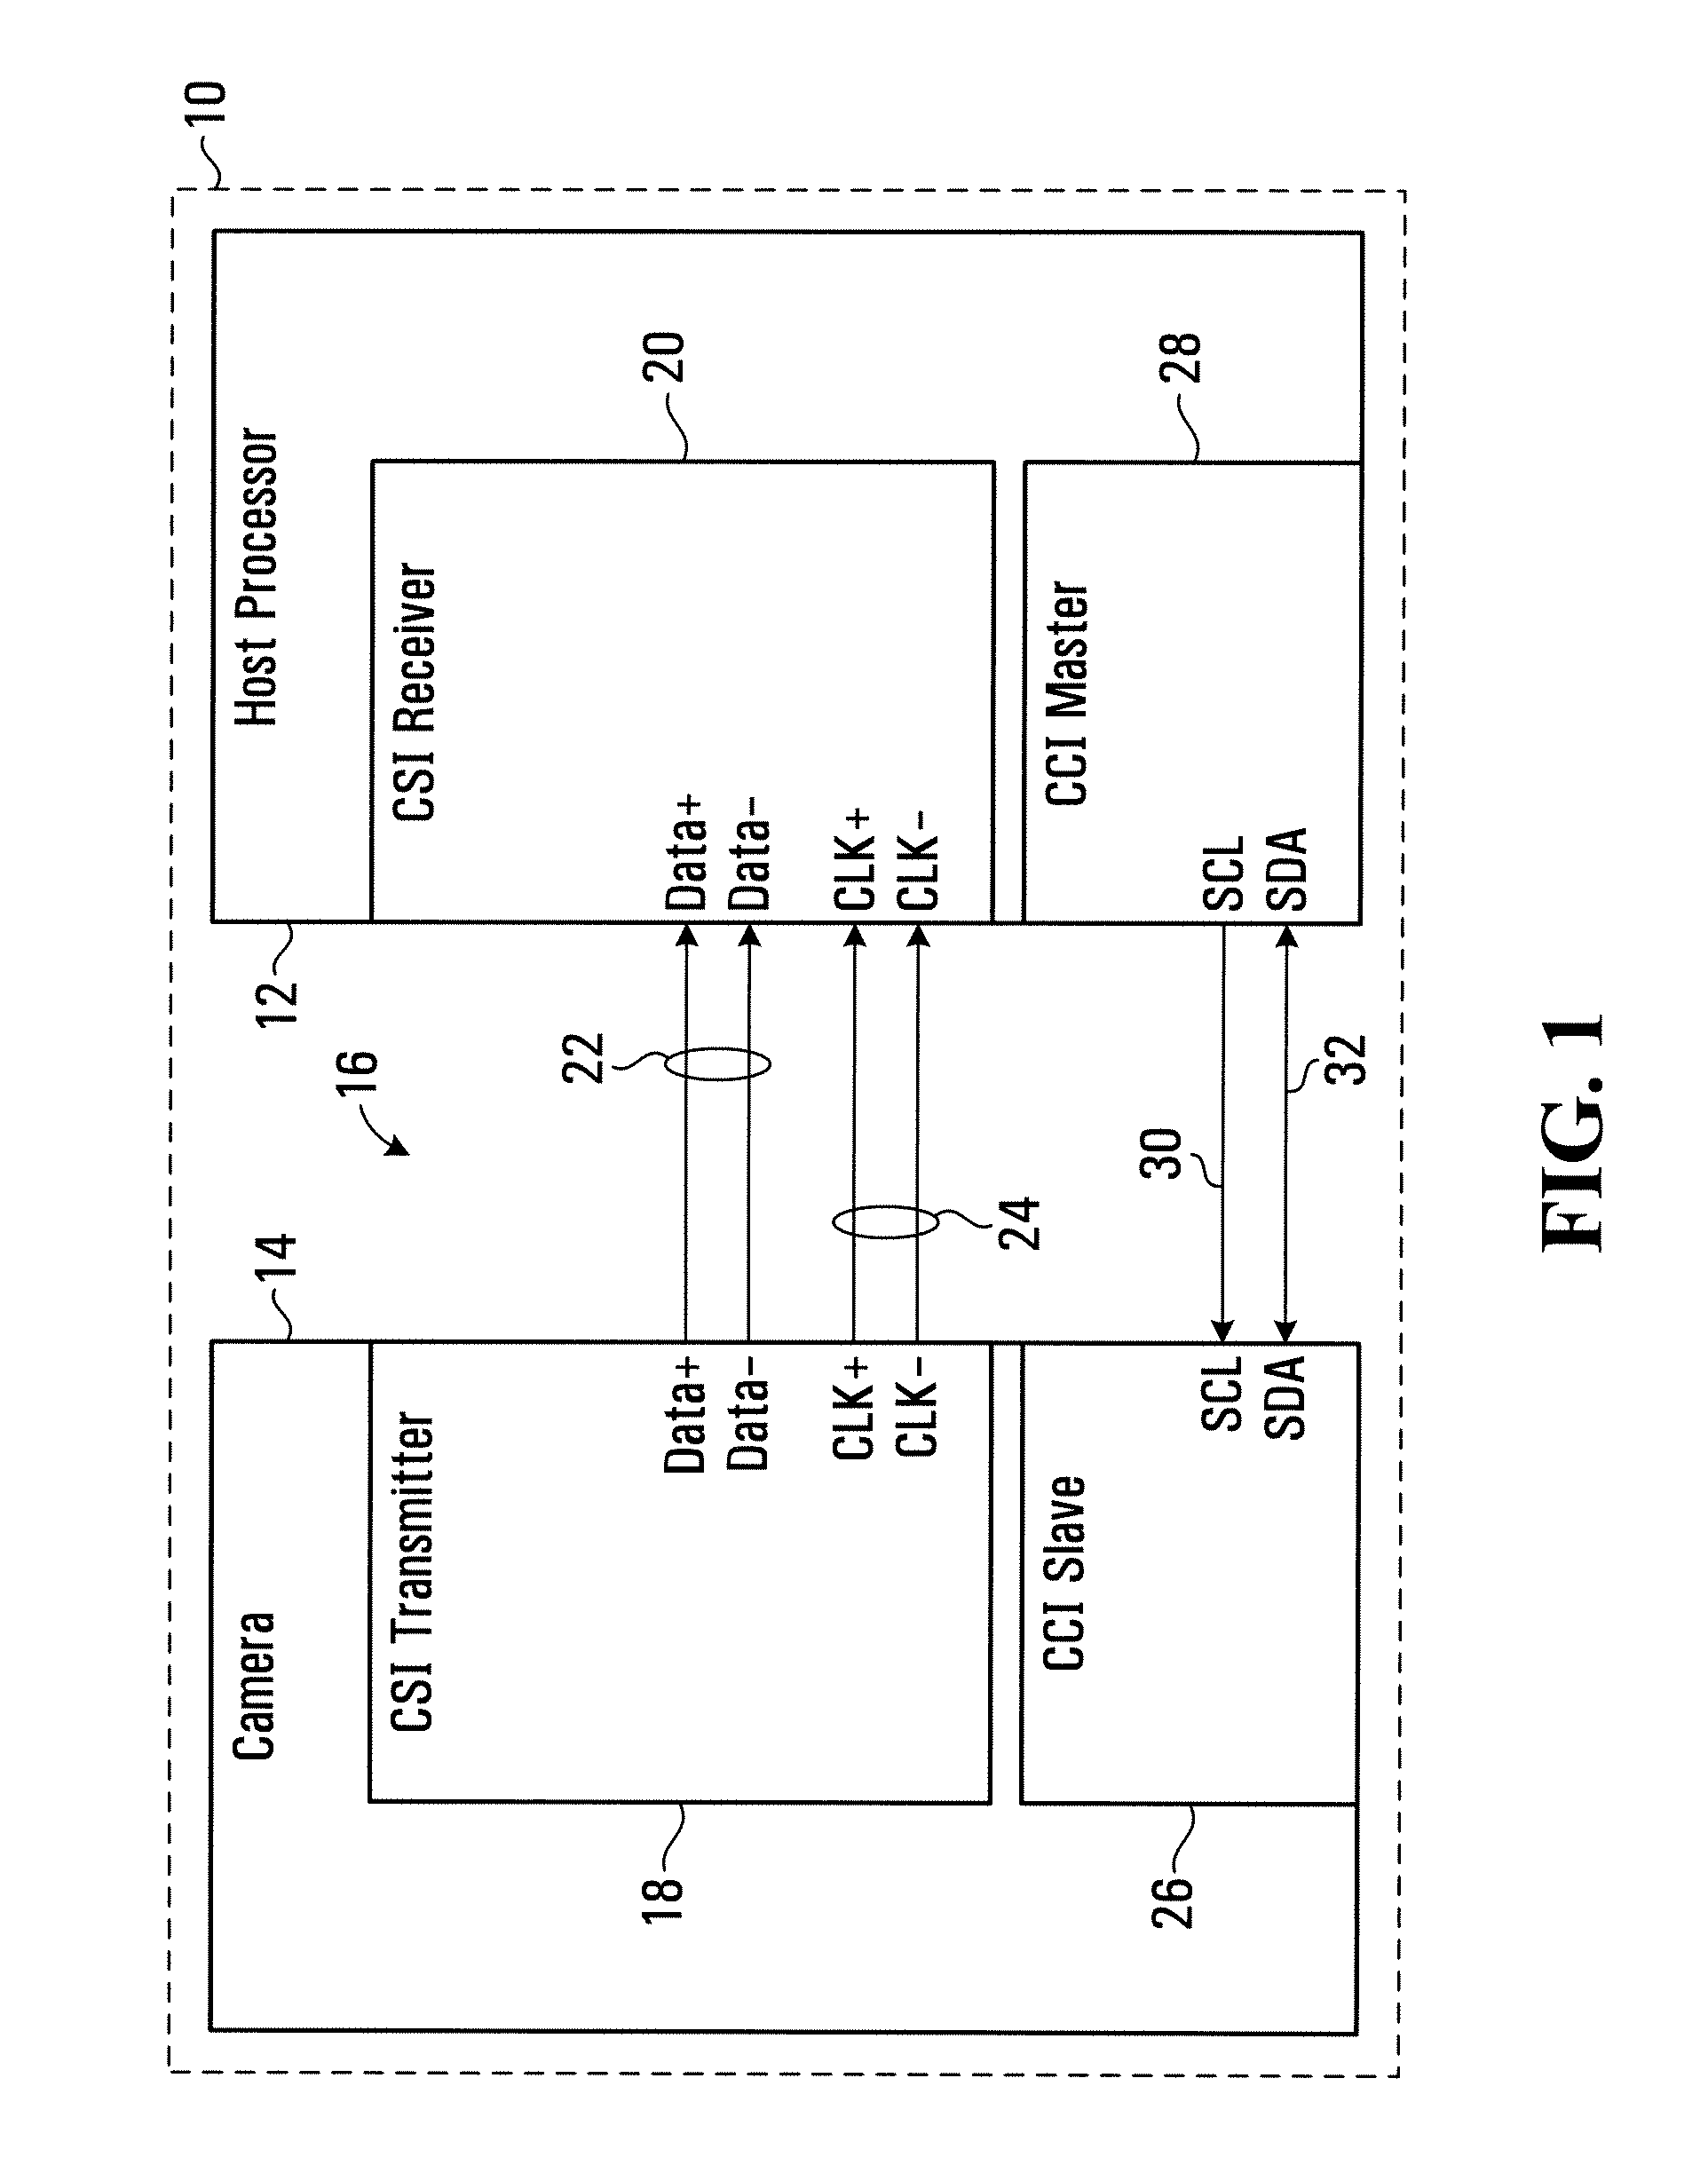 Graphics multi-media IC and method of its operation